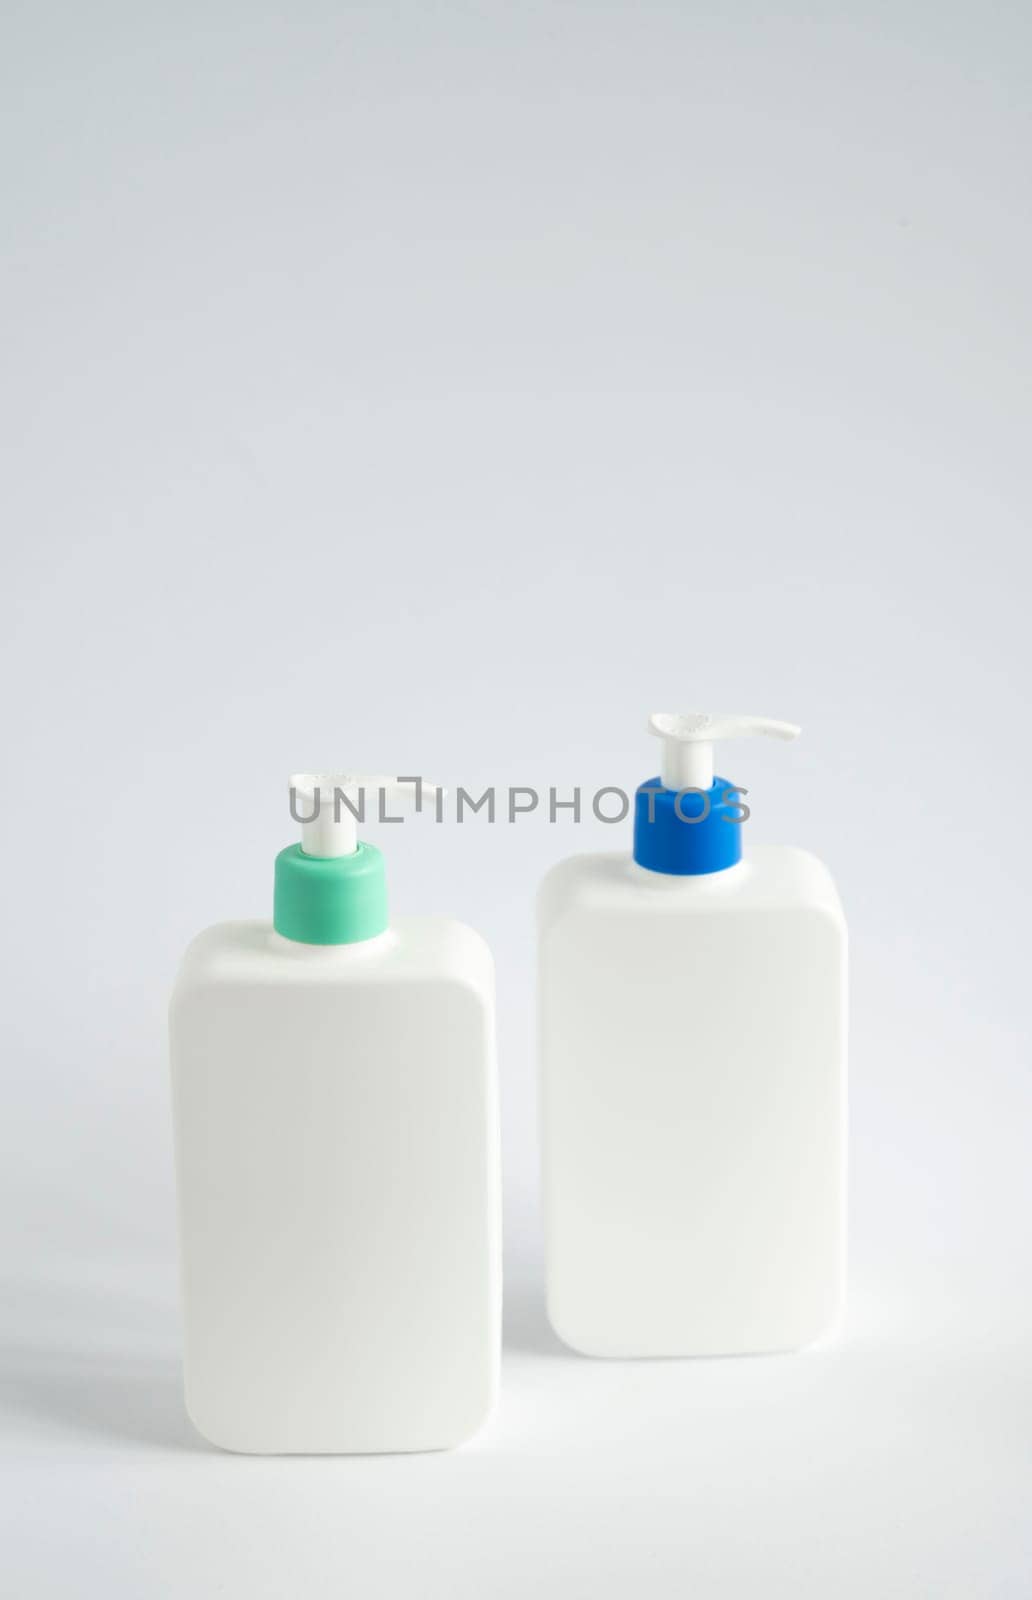 Two liquid containers for shampoo, gel, lotion, cream, bath foam etc. Blank unbranded cosmetic plastic bottles with dispenser pump. by vovsht